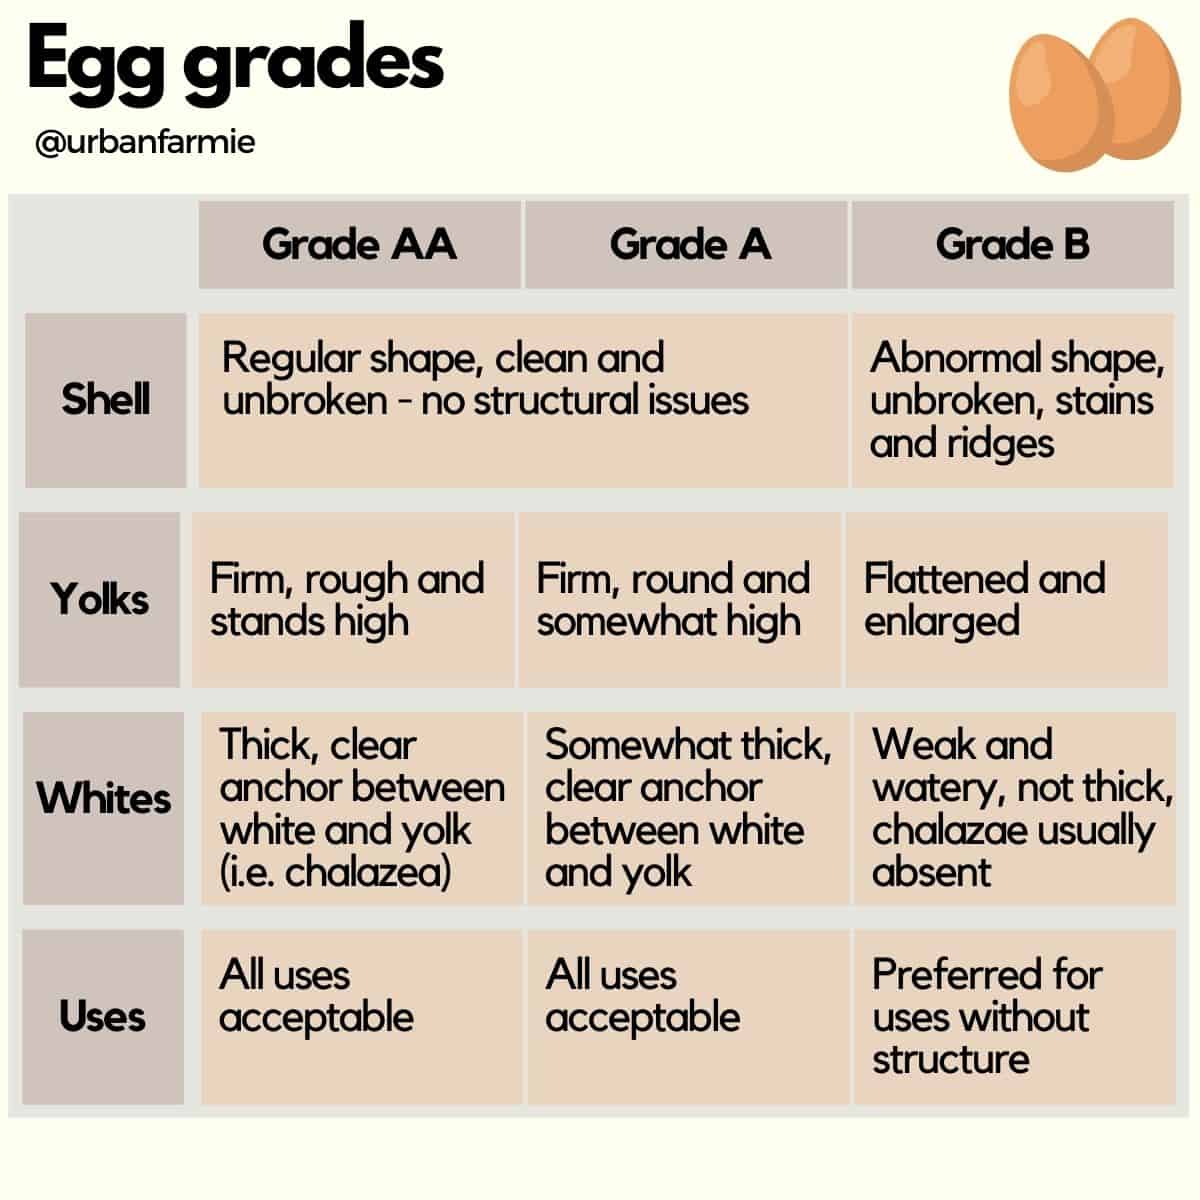 Infographic showing the various egg grades and differences